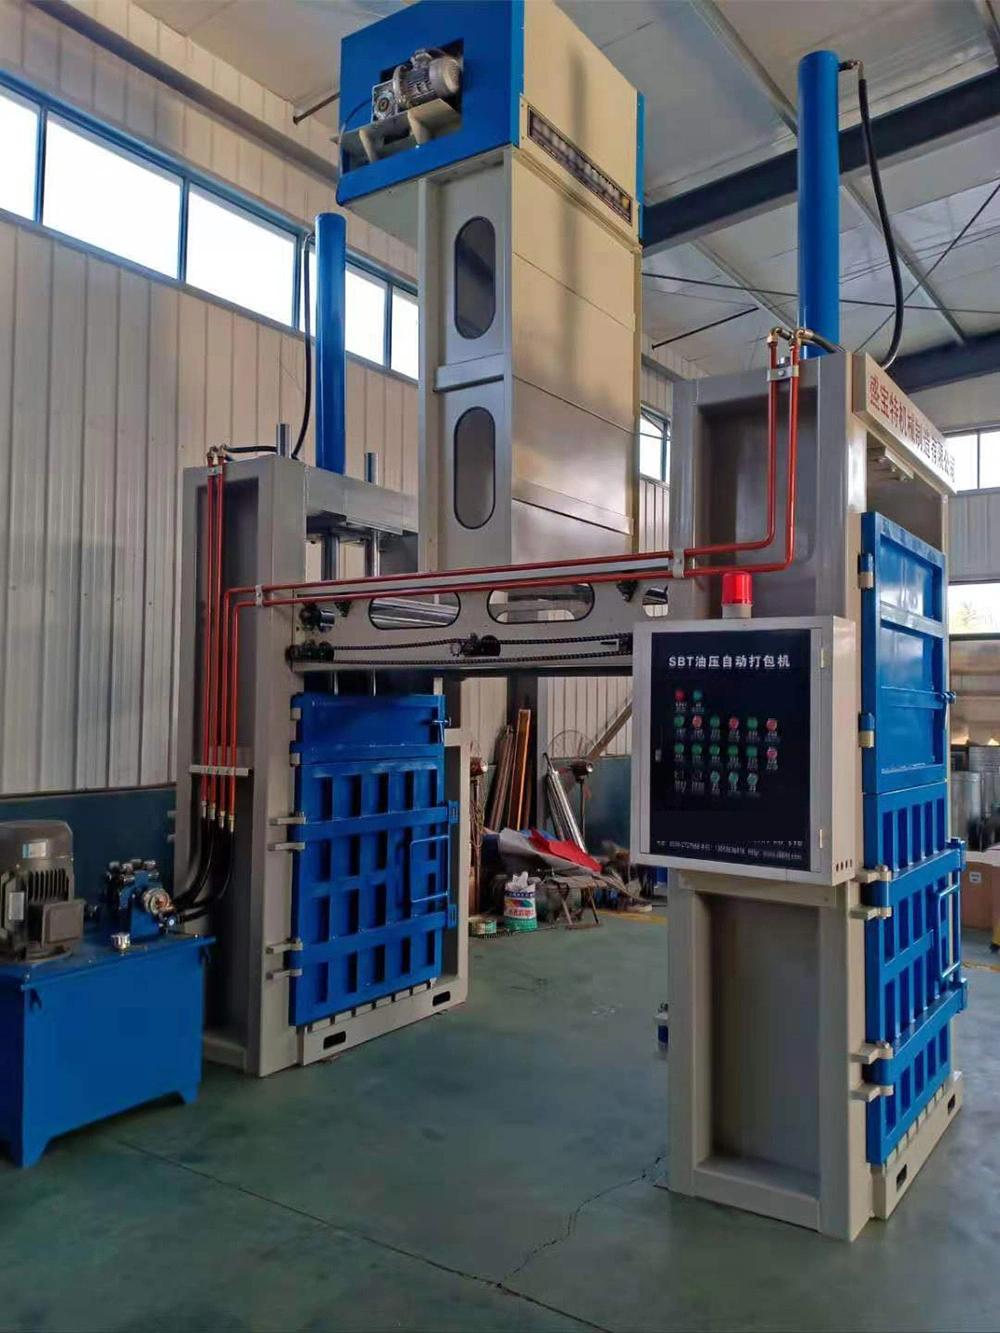 High Quality Vertical Pressure Balance System Baler Hydraulic Press Waste Plastic Film Packaging Machine Factory Price Baler for Recycling Industry